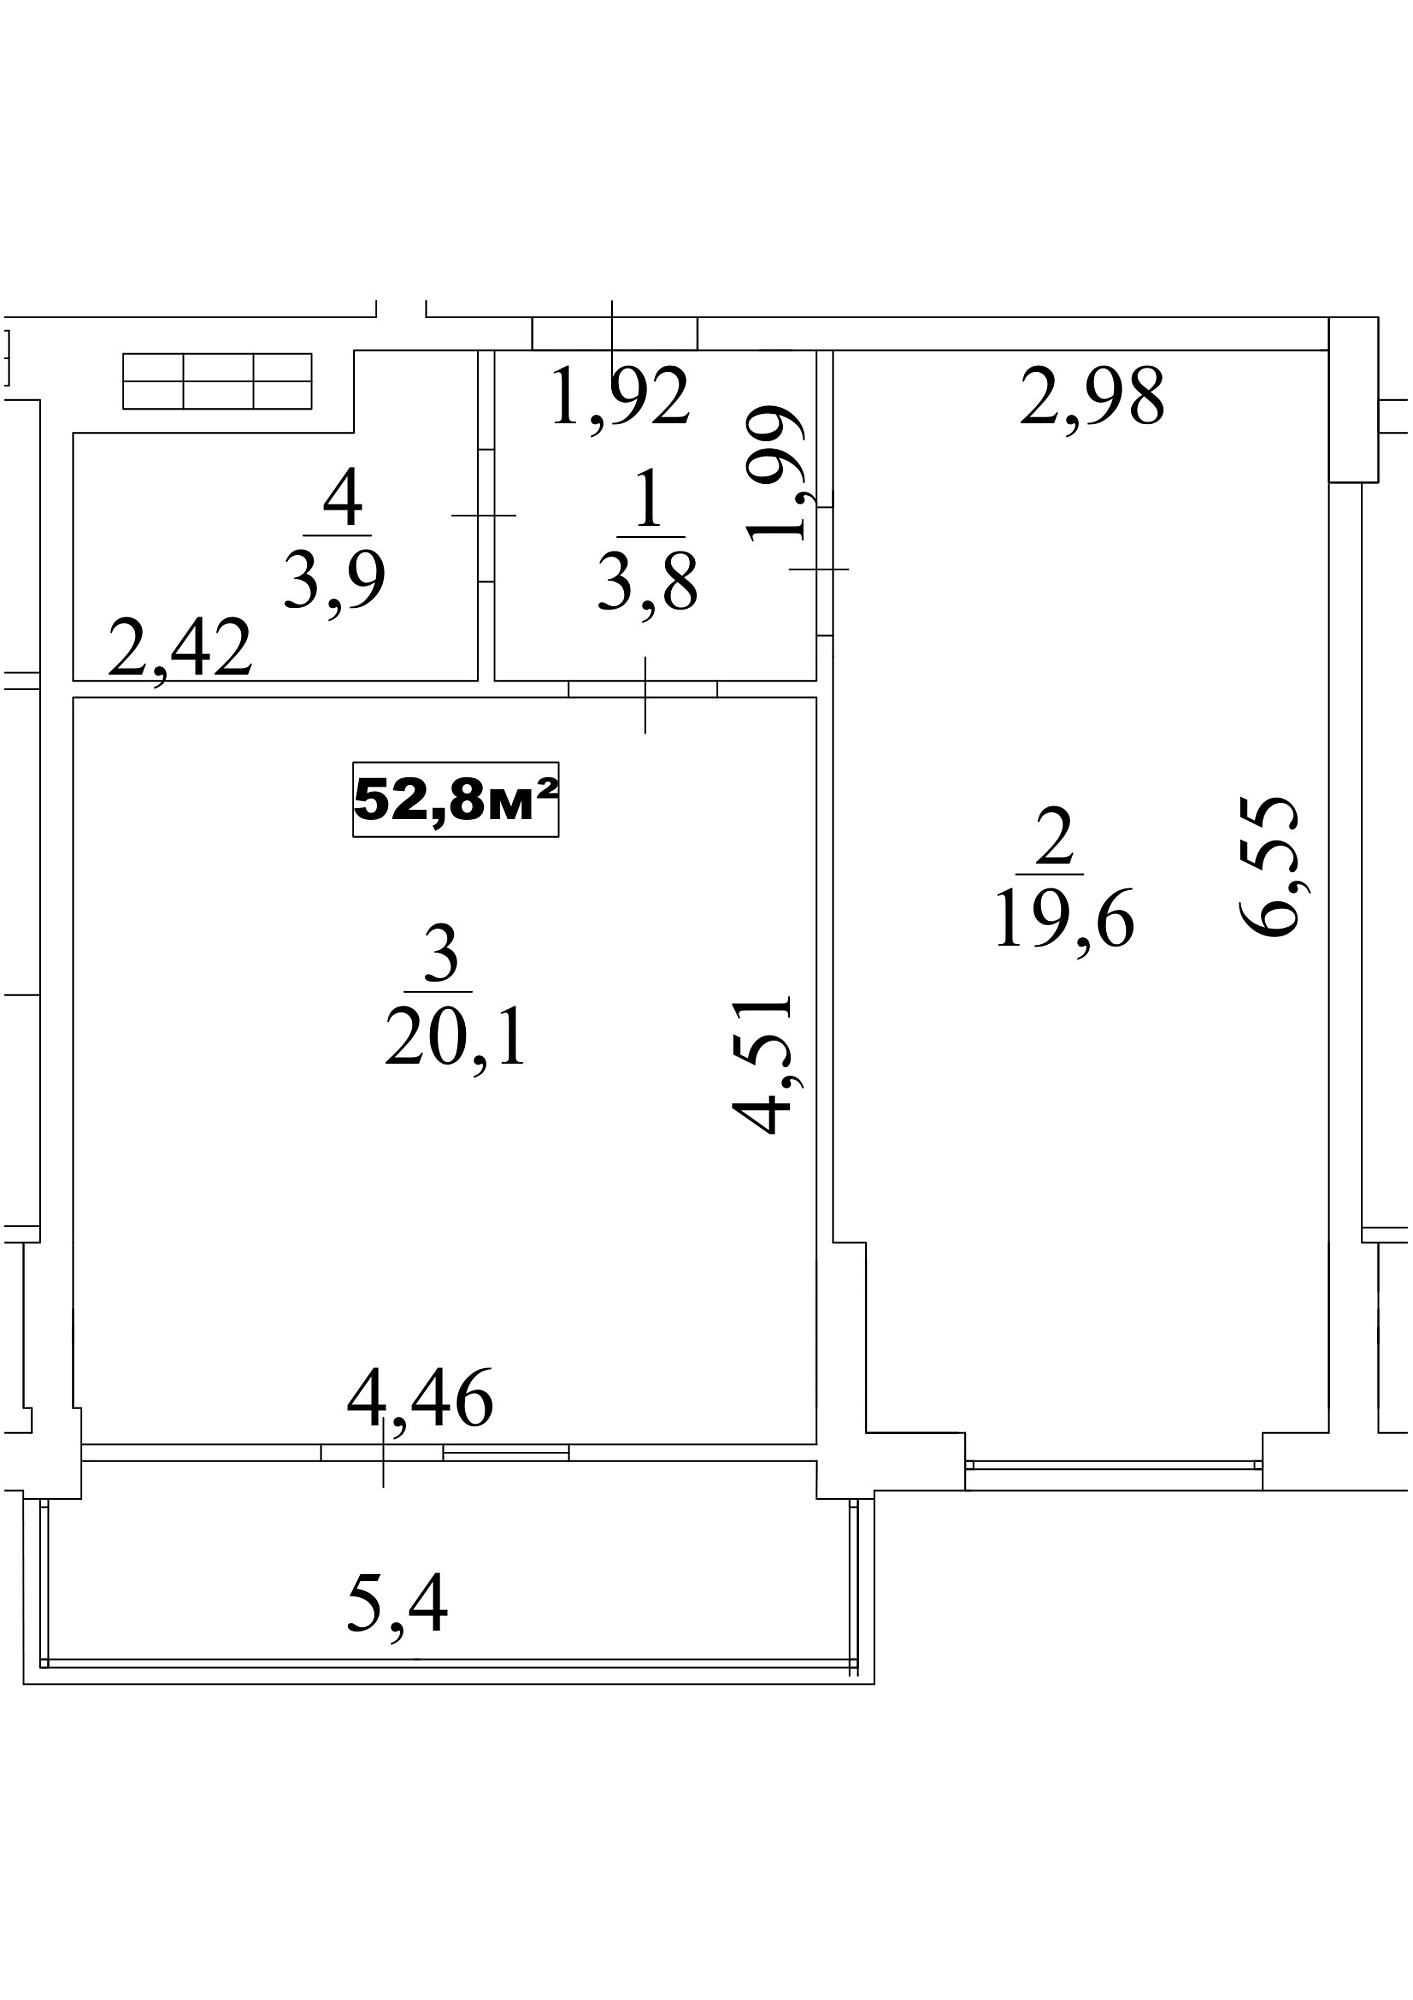 Planning 1-rm flats area 52.8m2, AB-10-07/00062.